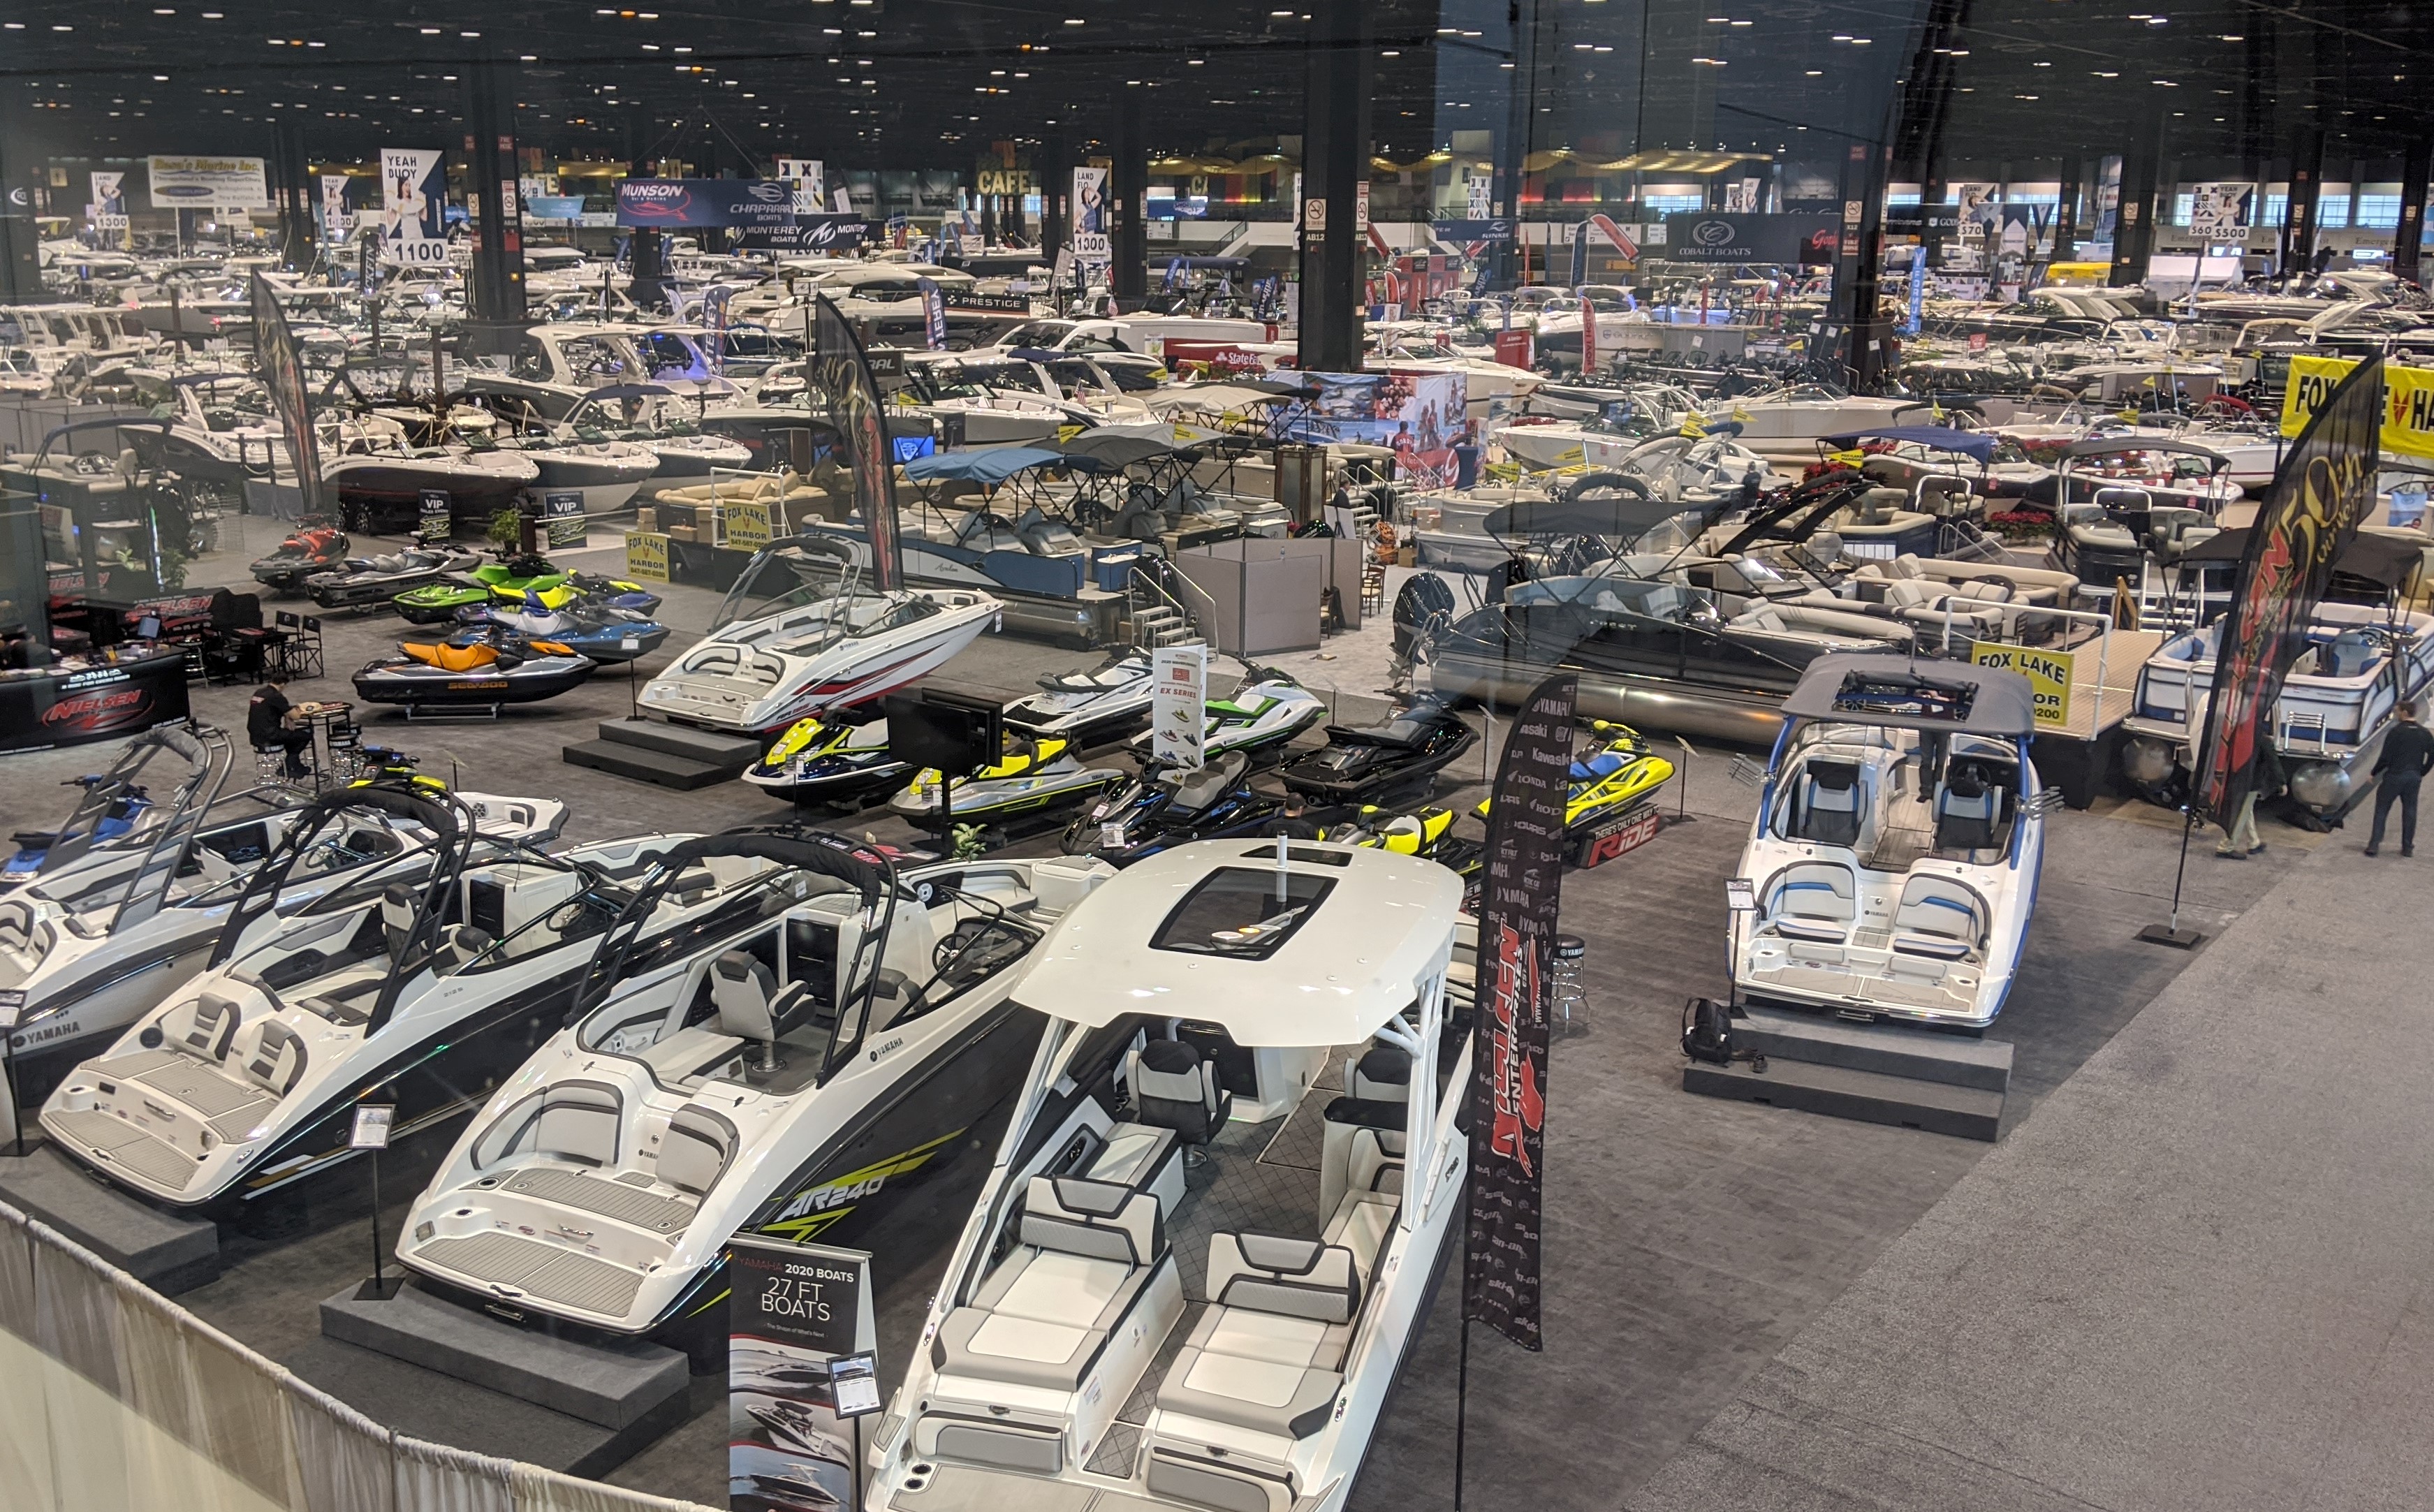 The Chicago Boat Show, shown in January 2020, was the first Chicago-area show to announce this fall that it was canceled for 2022. Credit: Dale Bowman